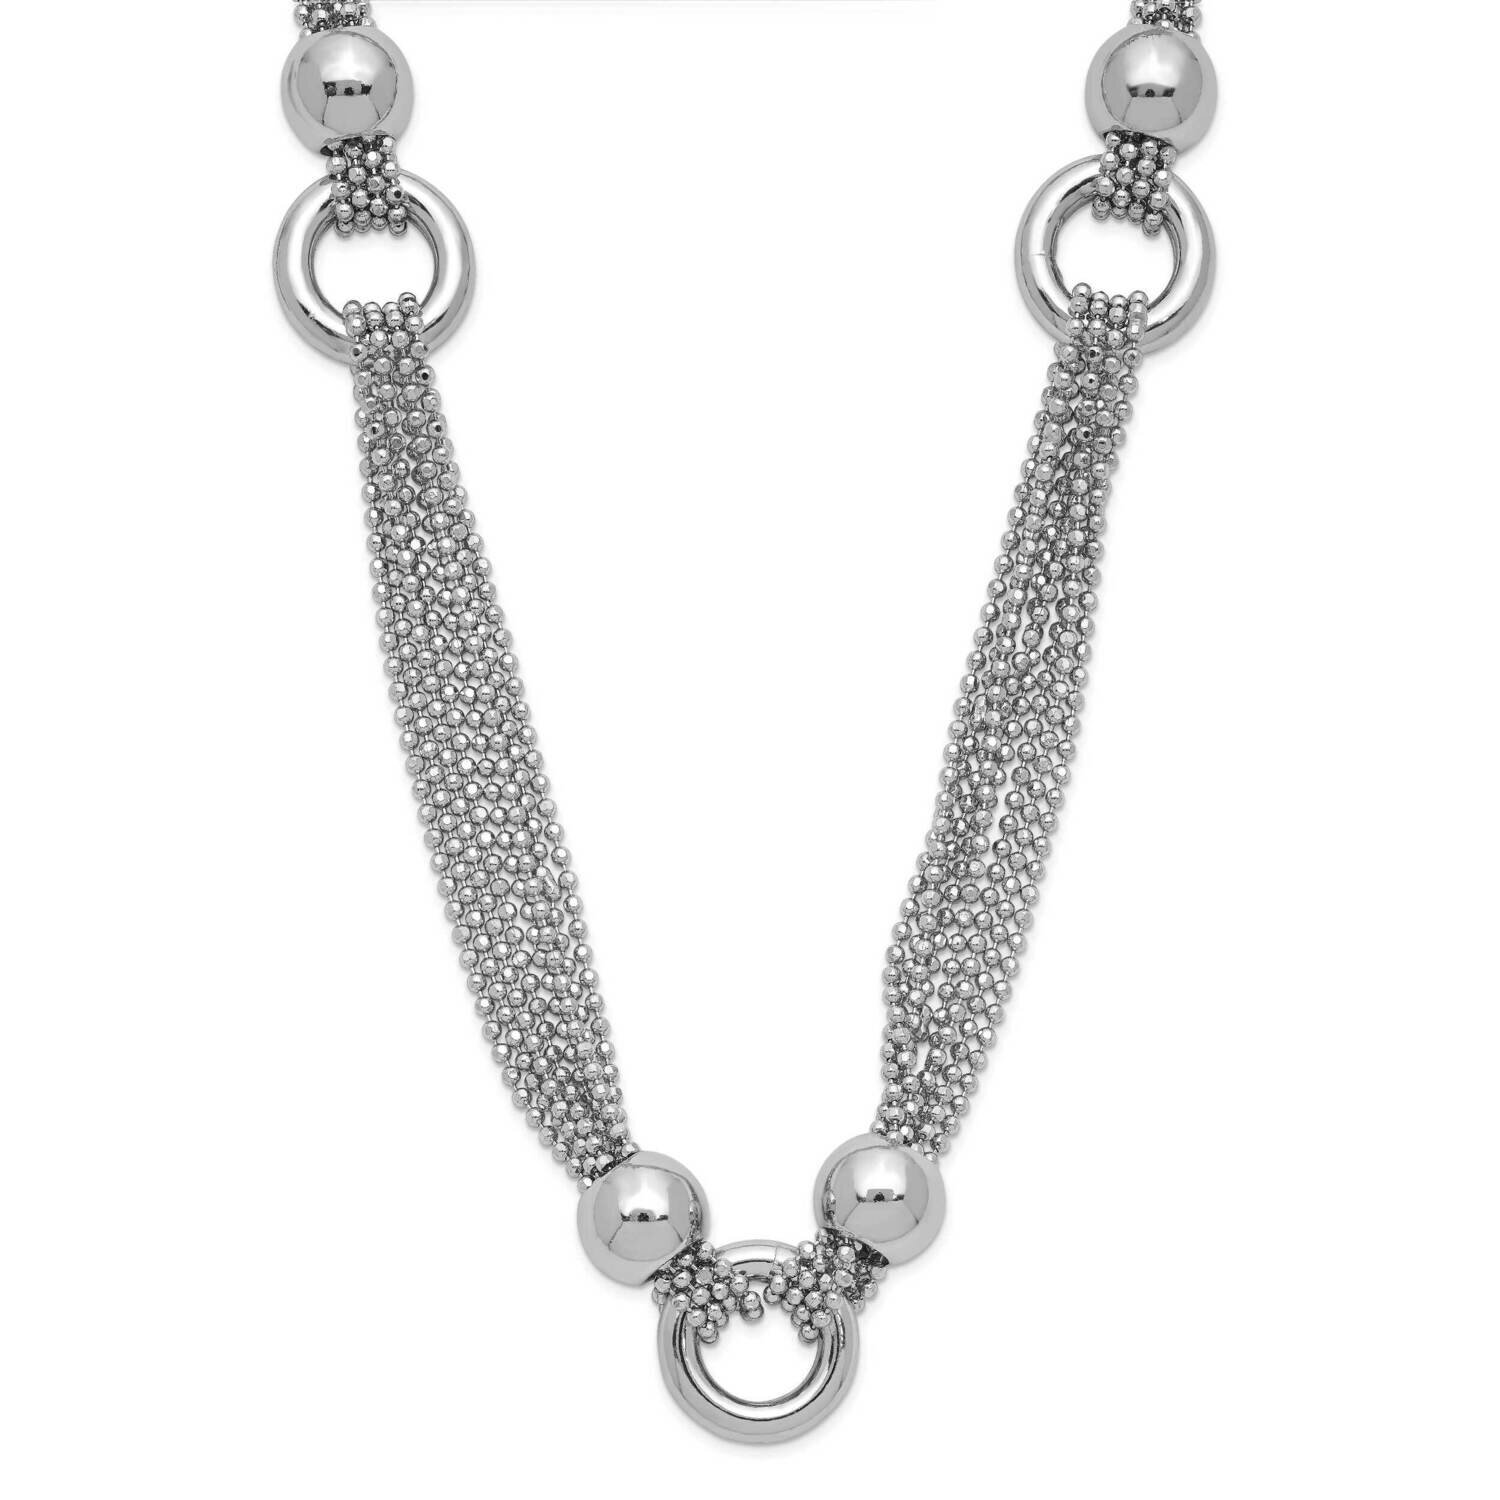 Beaded Chain Fancy Necklace Sterling Silver Rhodium-Plated QPRF309-18